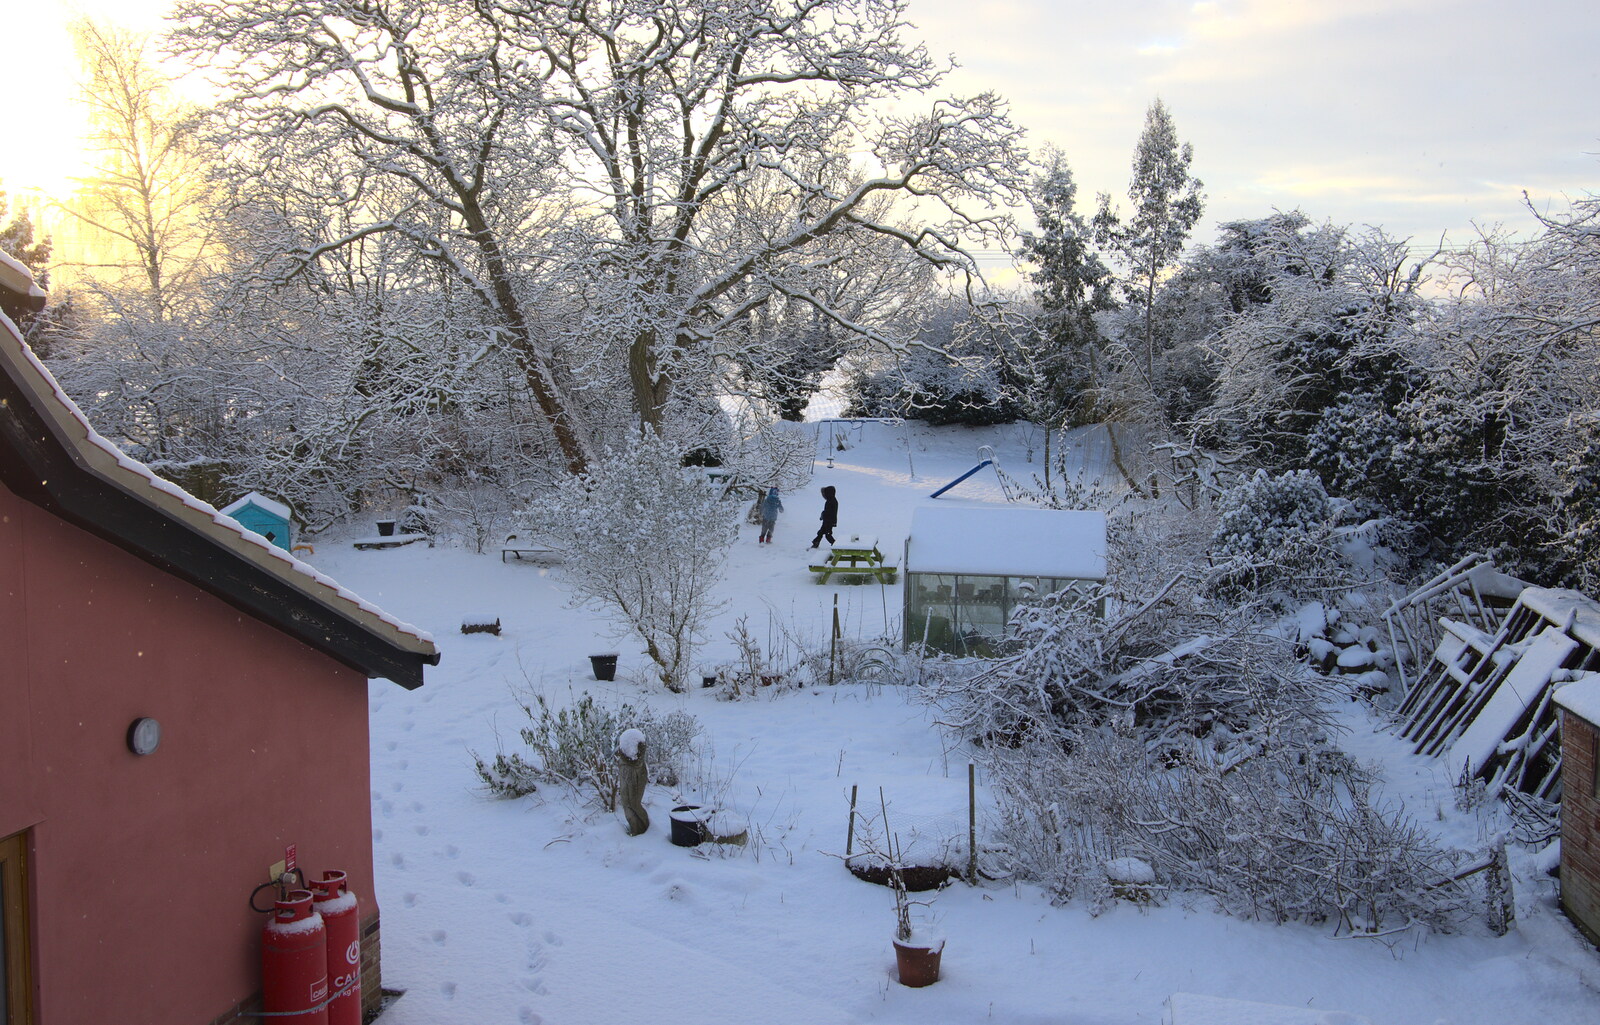 Snowmageddon: The Beast From the East, Suffolk and London - 27th February 2018: The boys are in the garden